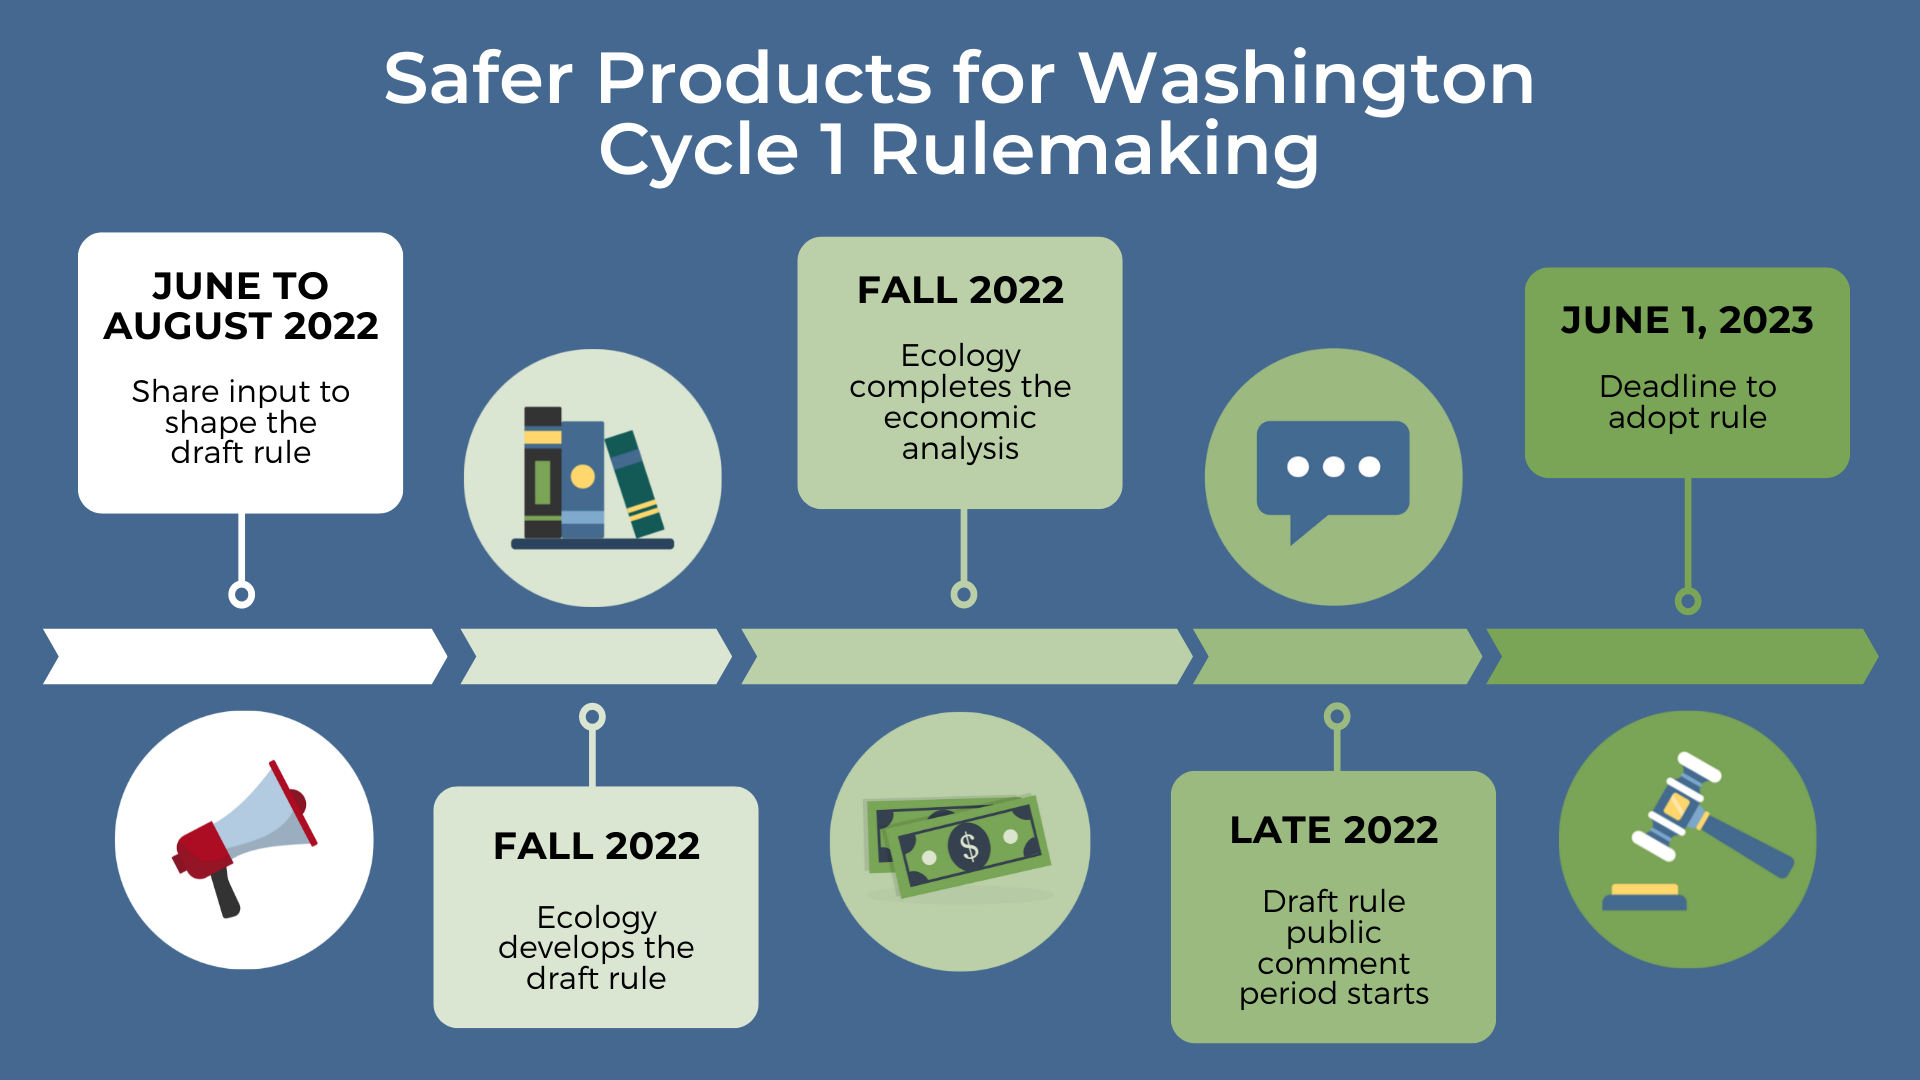 Timeline for rulemaking from input to shape the draft rule to rule adoption